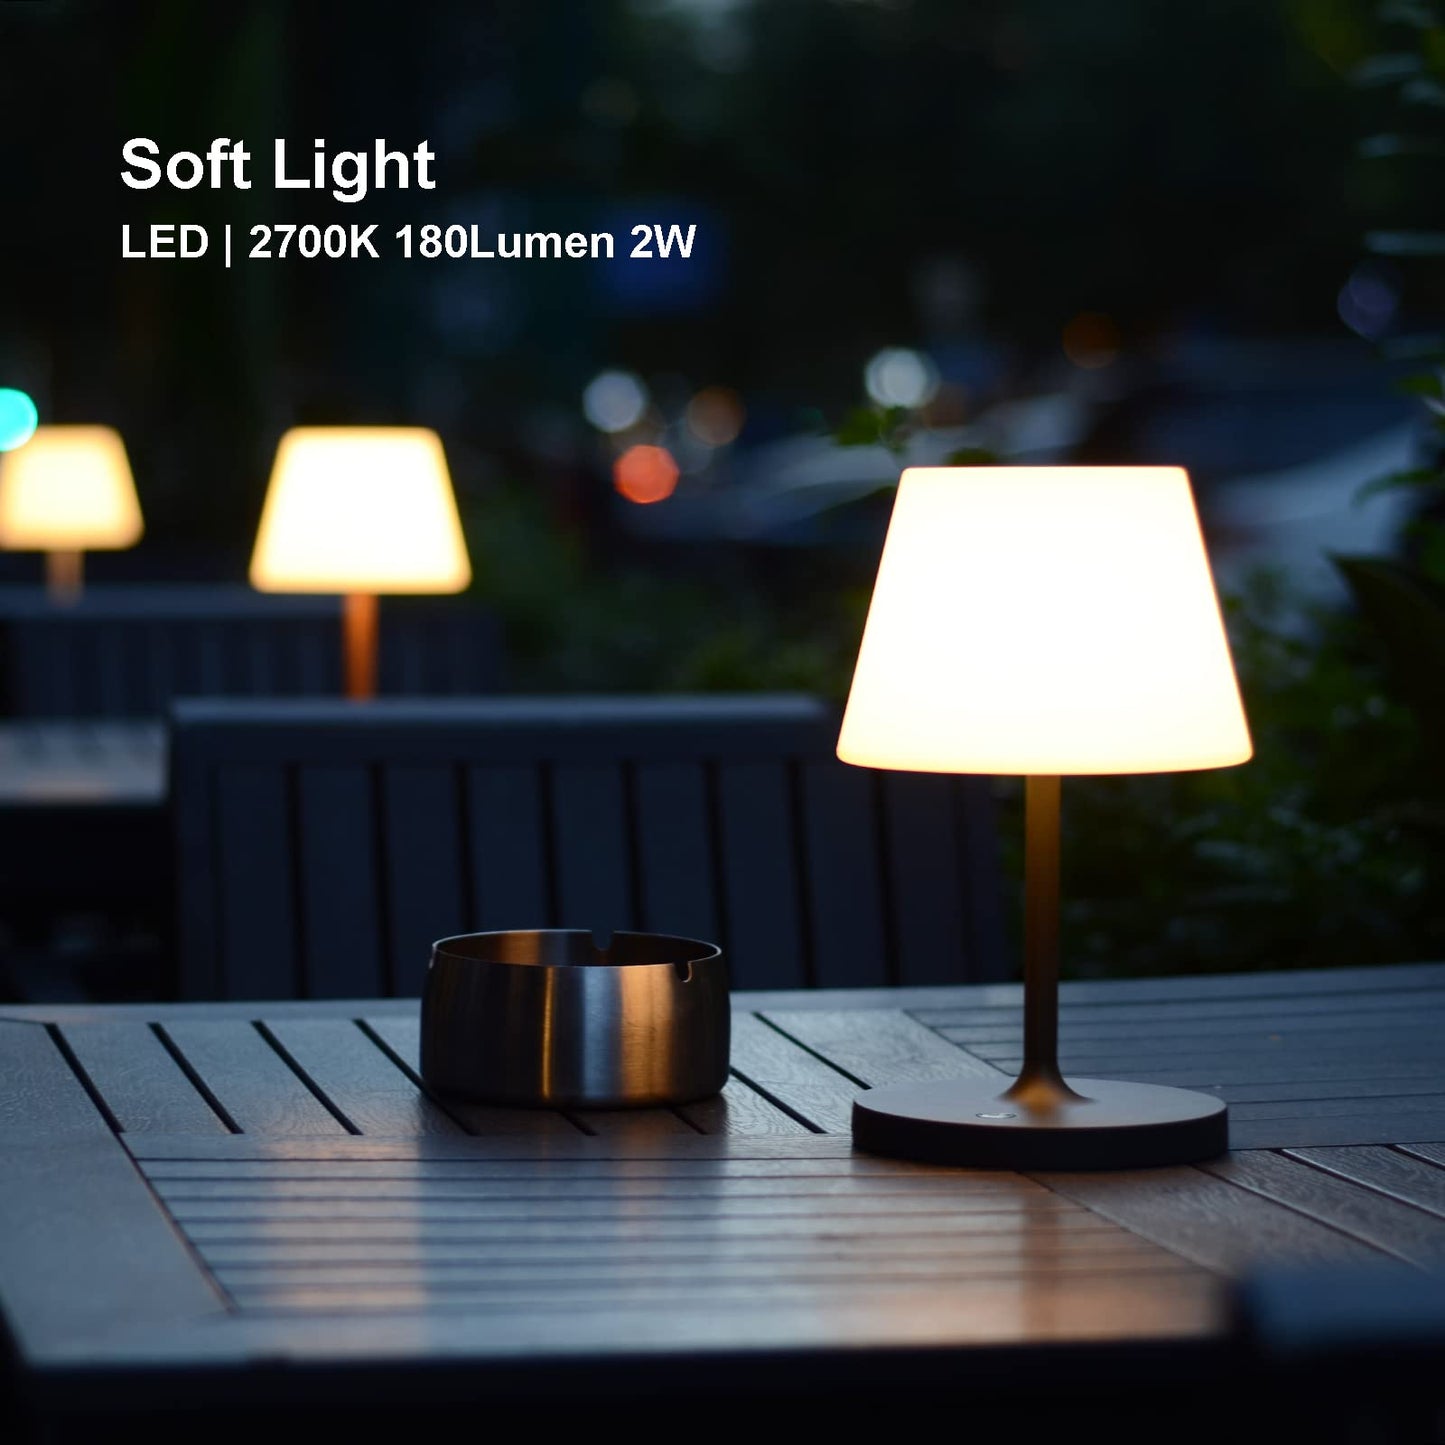 LOTITOL Outdoor Table Lamp / Cordless USB Rechargeable 4000mAh / 2700K LED / Touch Dimmable / Portable Battery Operated / IP44 Waterproof / PE shade / Bedroom Dinning Camping Patio (9.6in, Wood Grain)